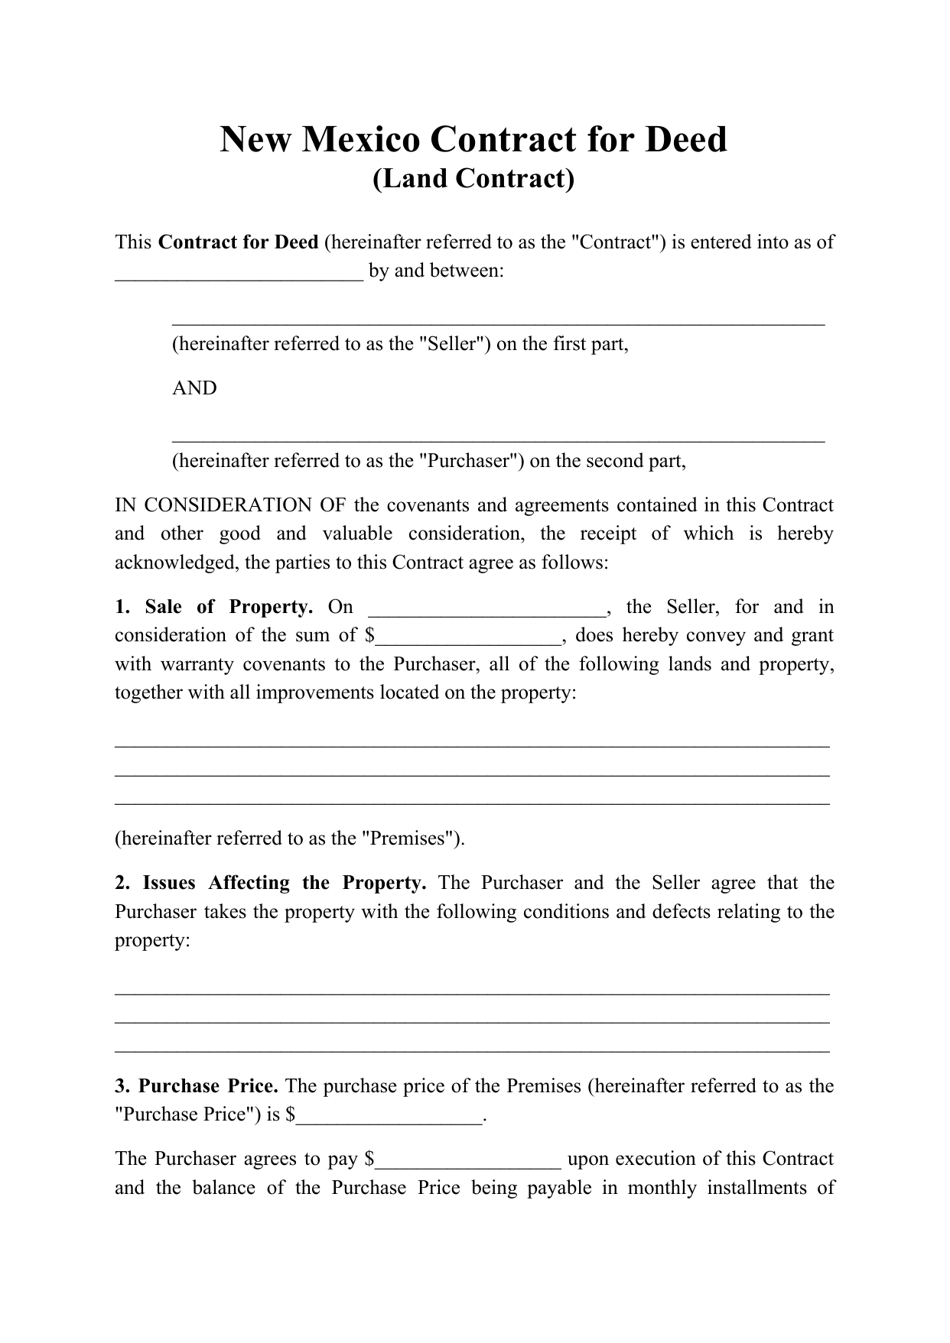 Contract for Deed (Land Contract) - New Mexico, Page 1